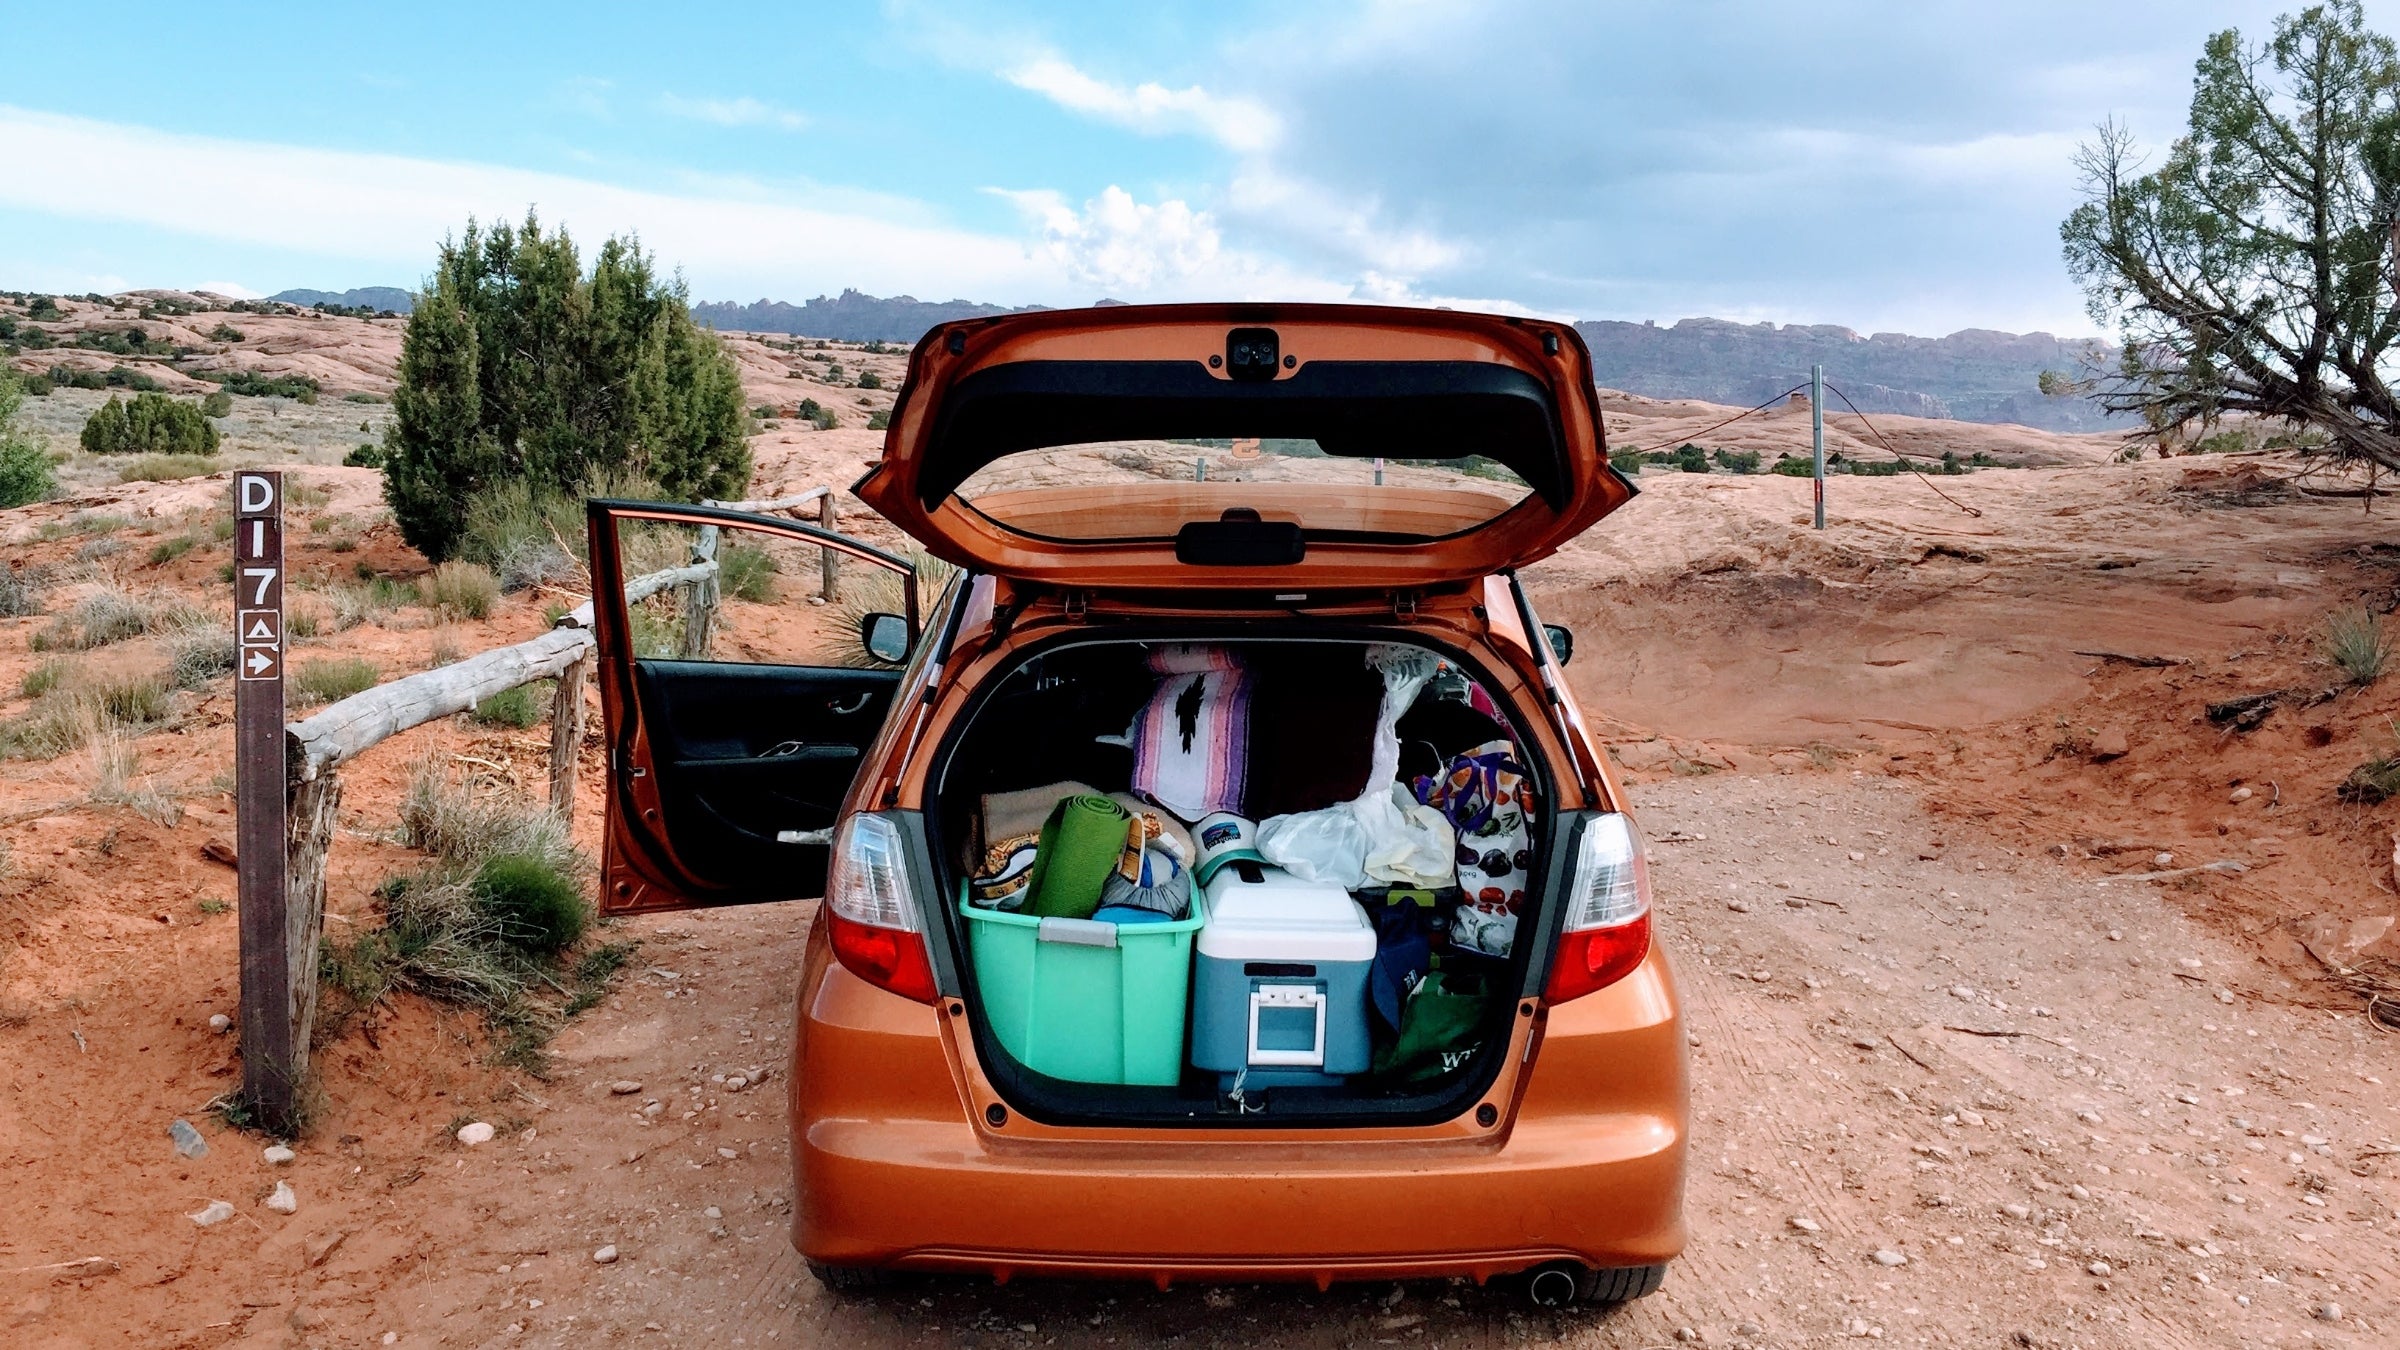 An open car trunk packed with camping gear on a rural desert road.